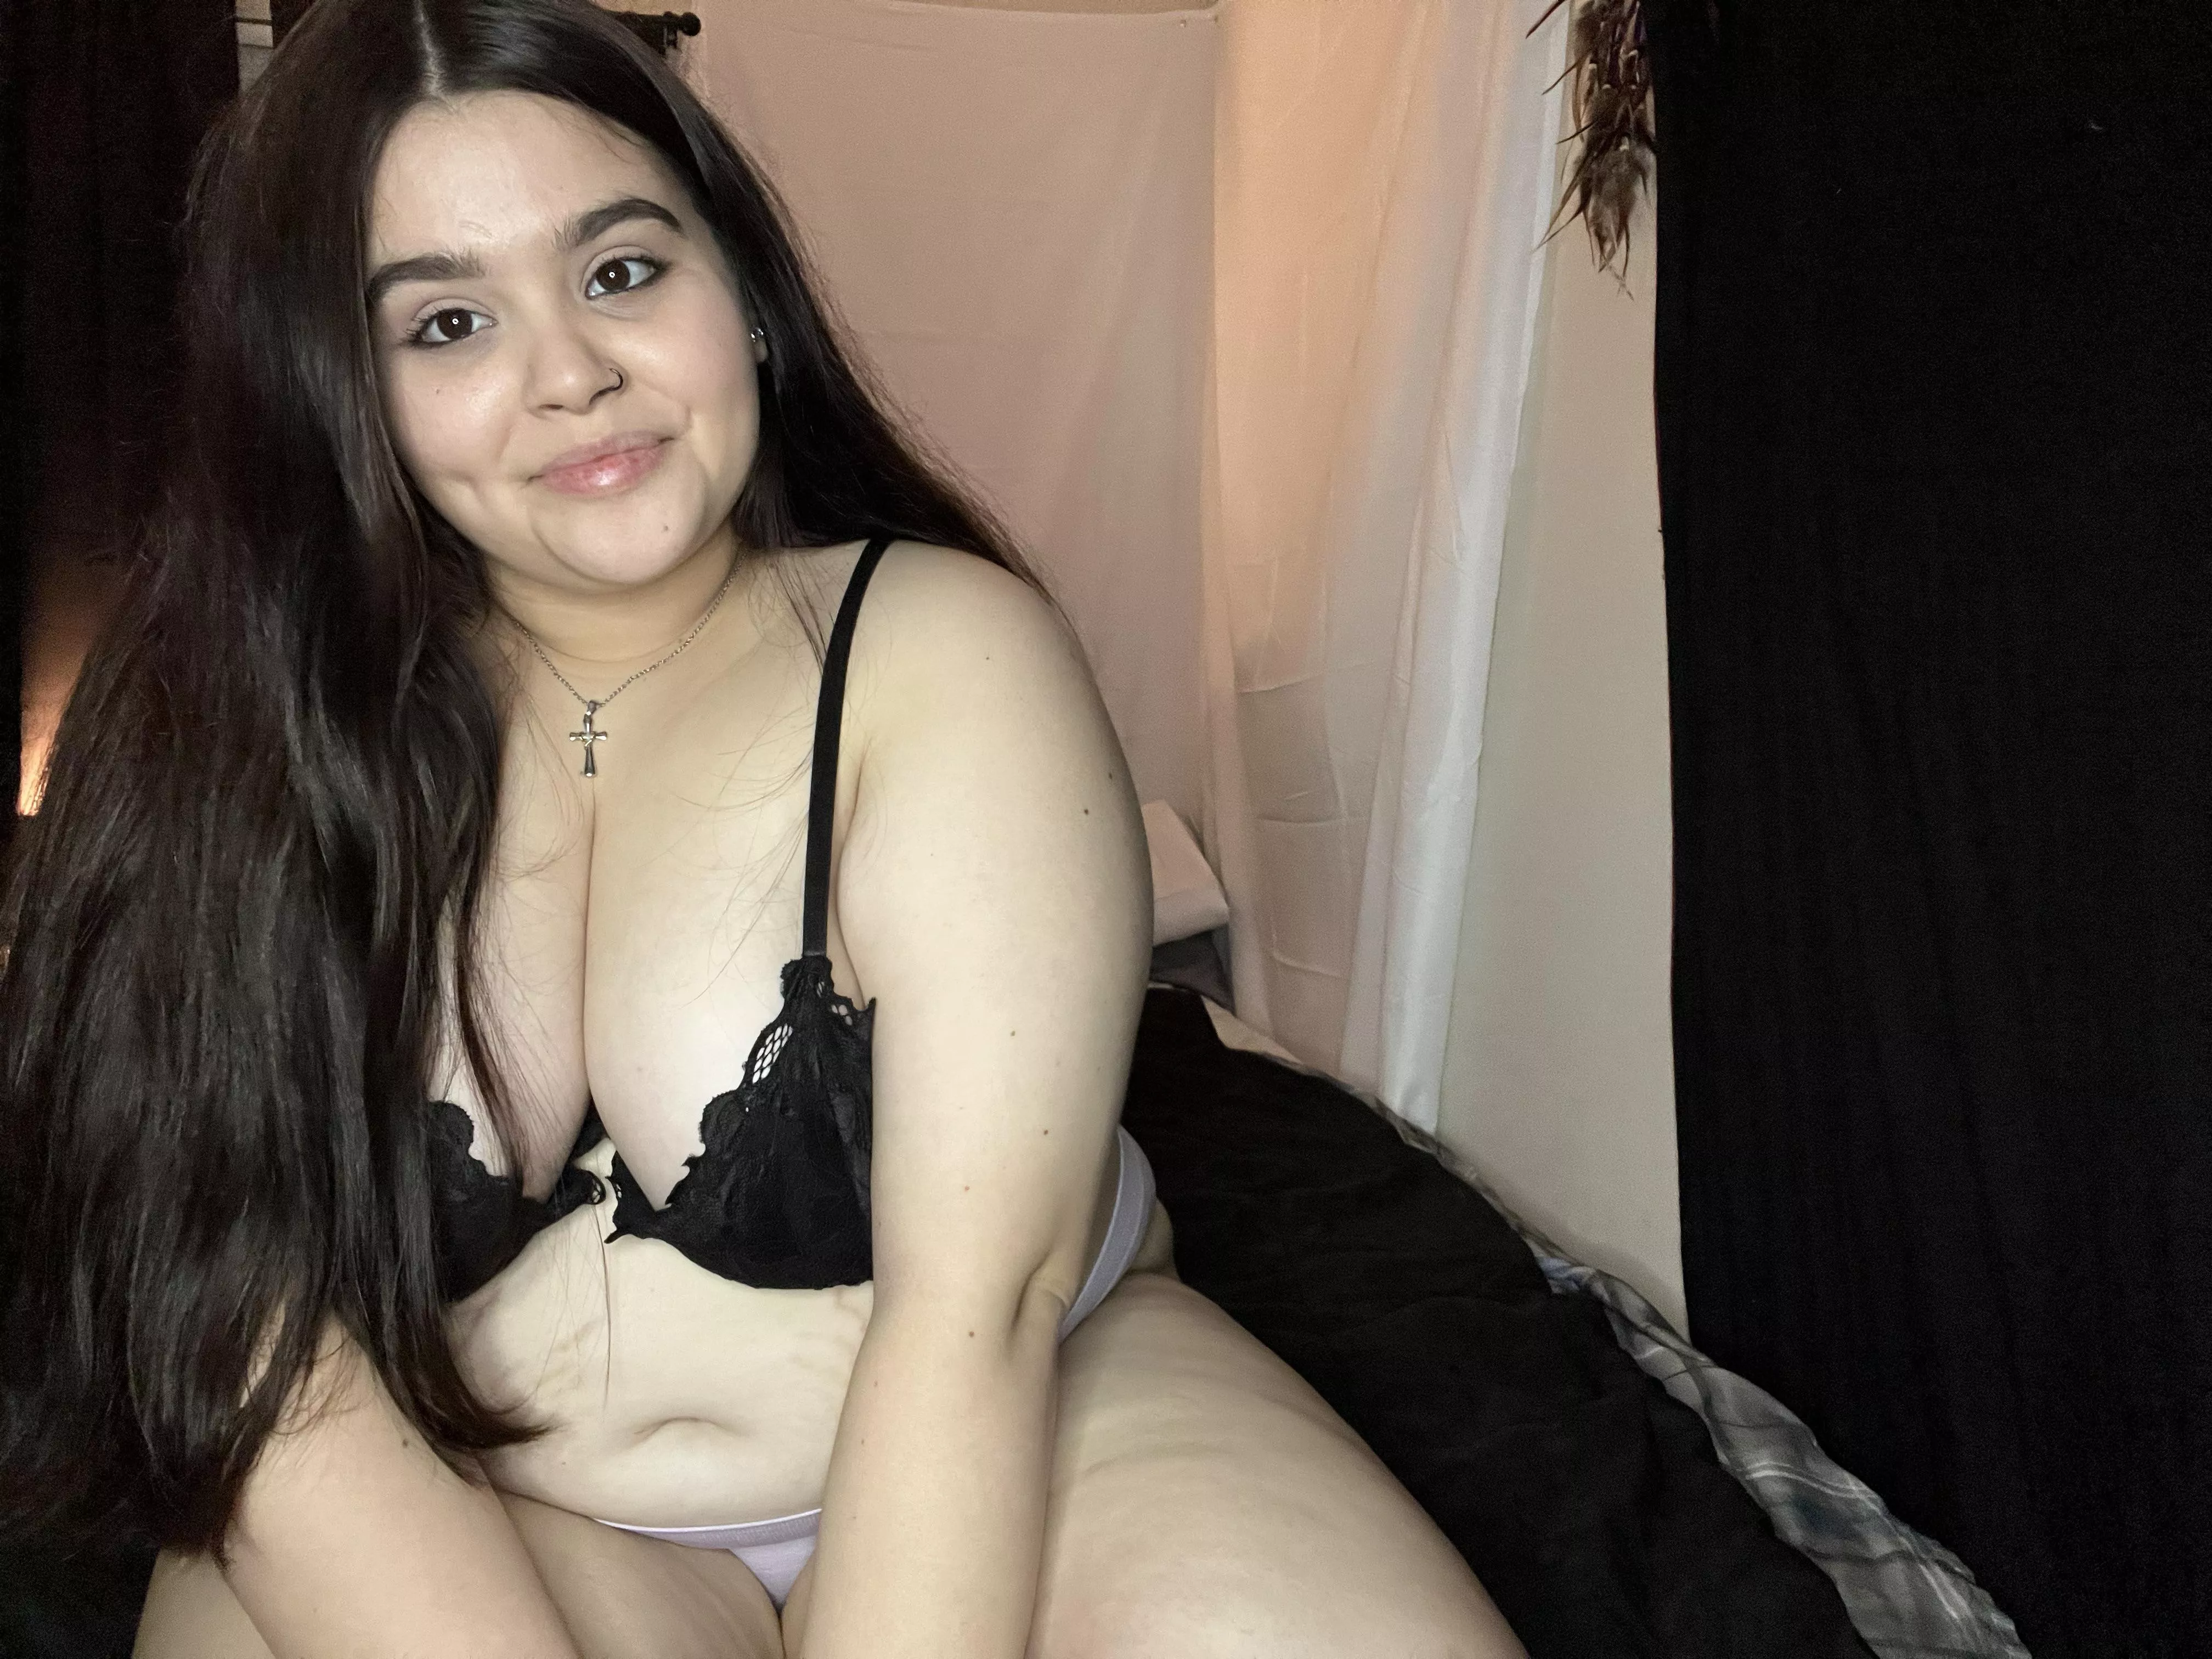 Chubby Latina Pictures